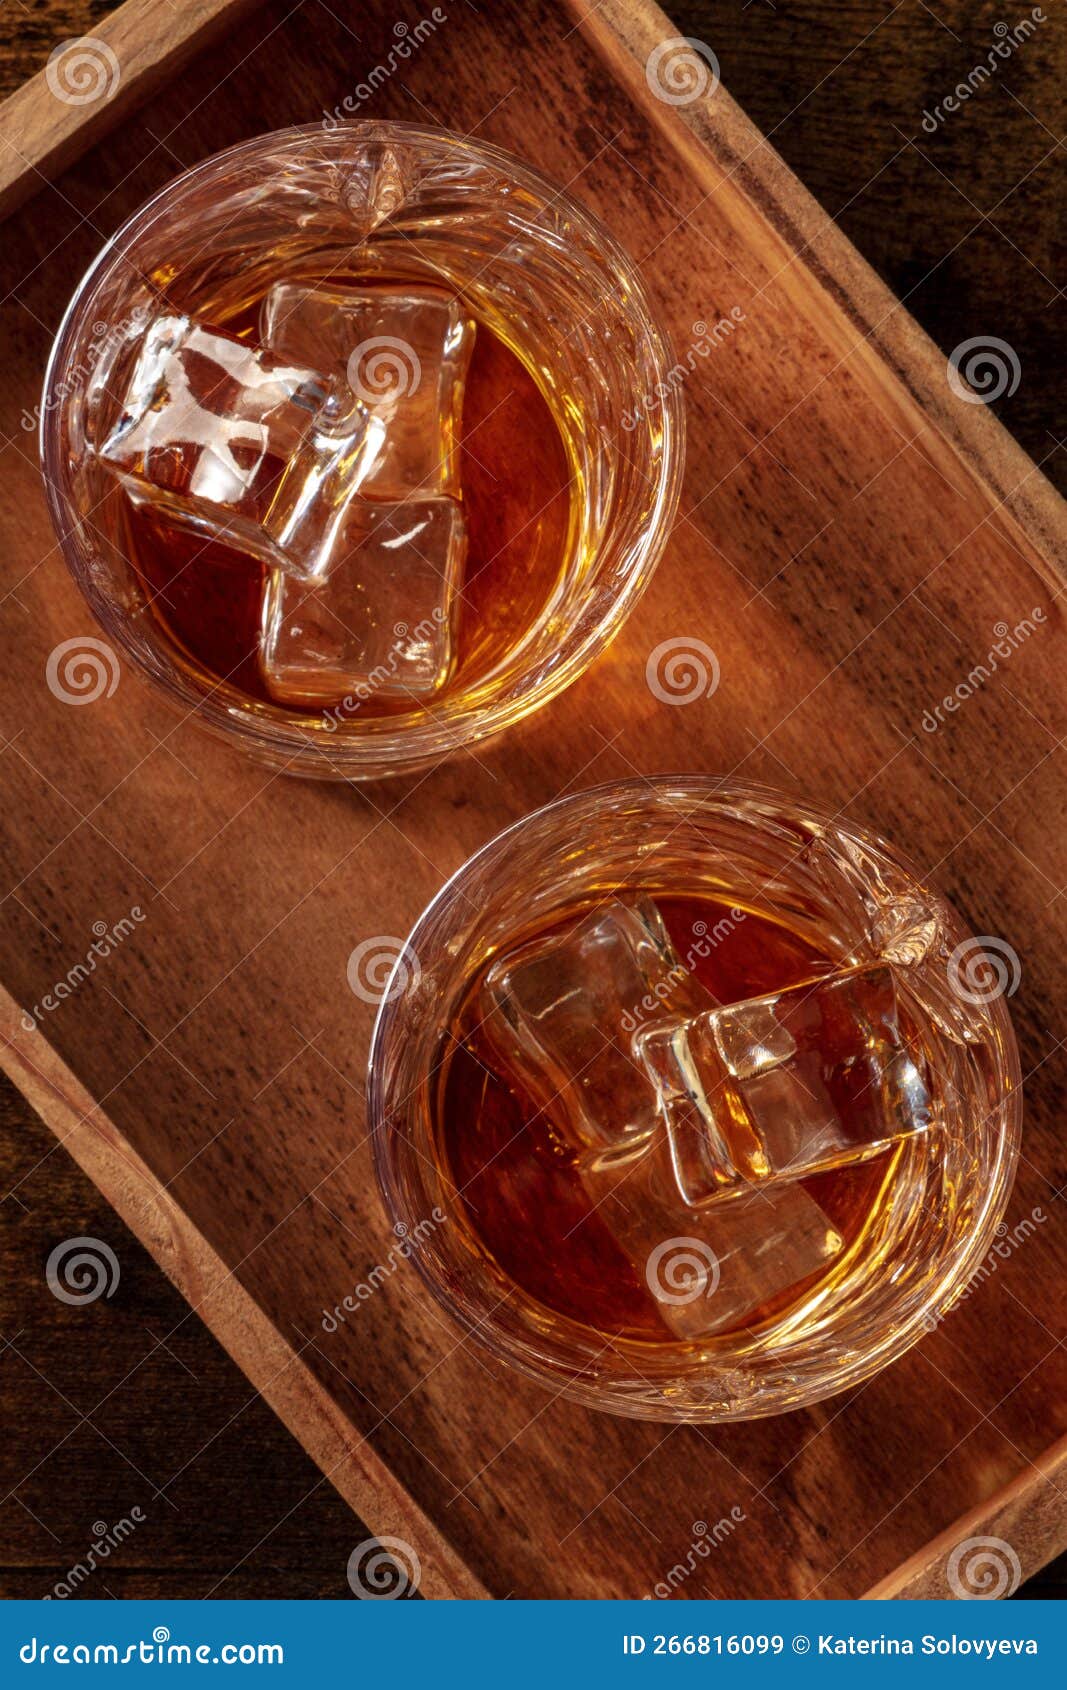 whiskey in glasses with ice. bourbon whisky on rocks on a dark background